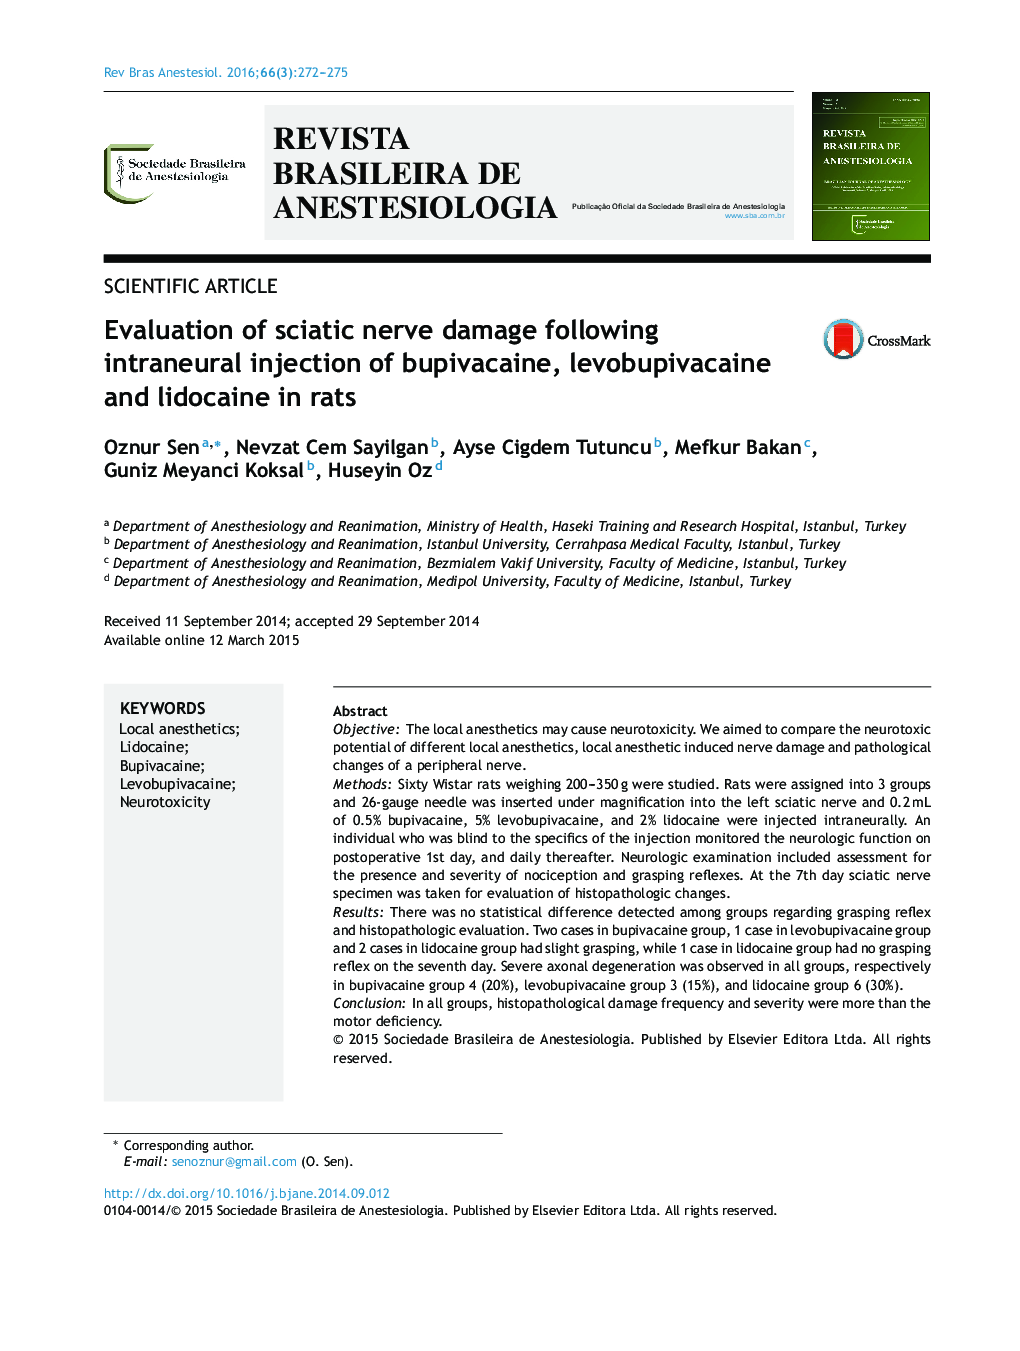 Evaluation of sciatic nerve damage following intraneural injection of bupivacaine, levobupivacaine and lidocaine in rats